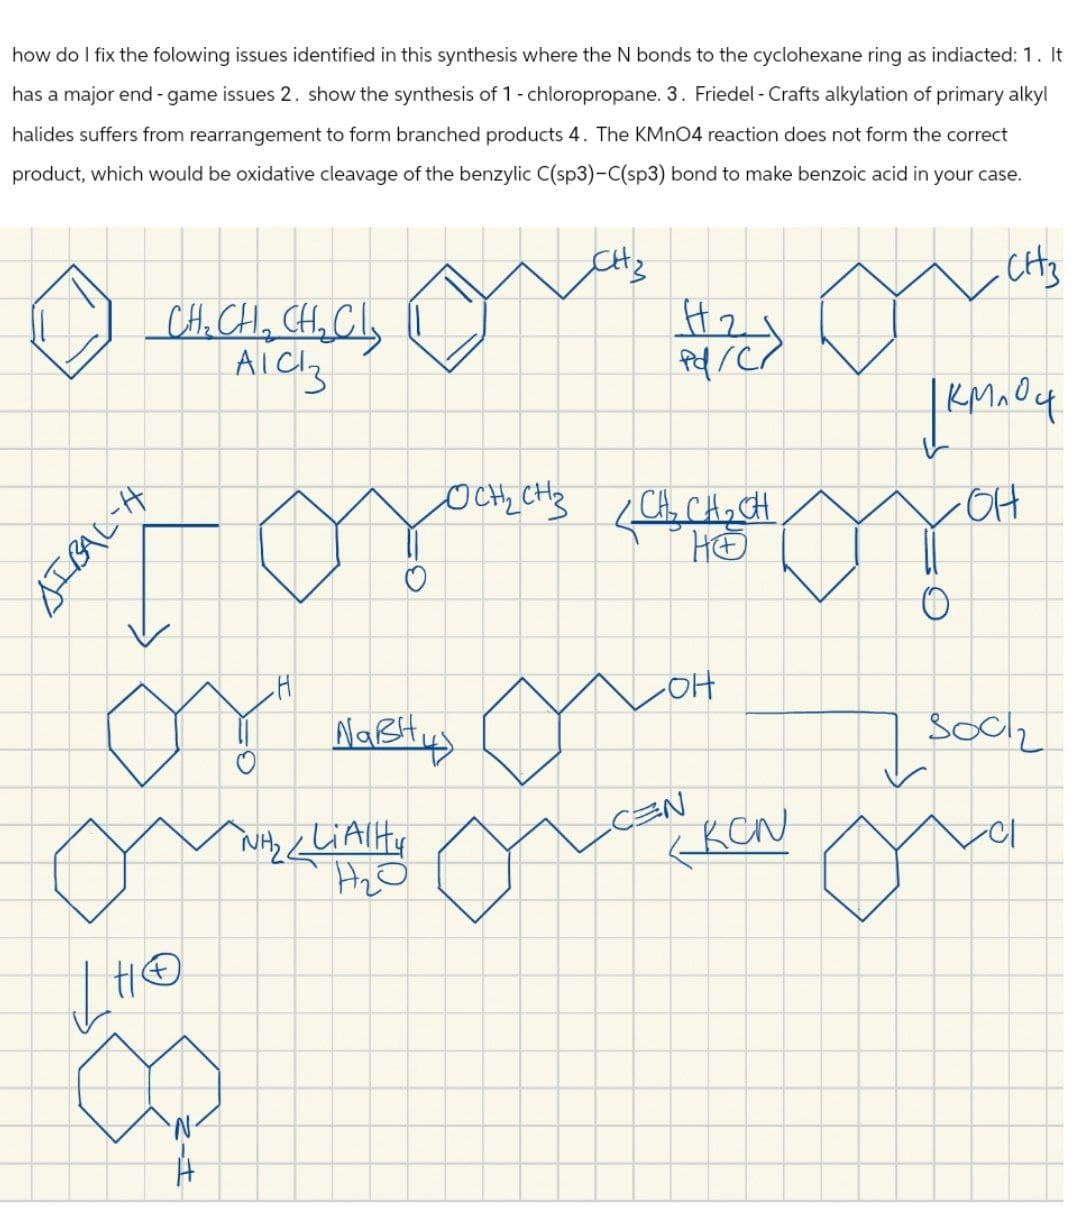 how do I fix the folowing issues identified in this synthesis where the N bonds to the cyclohexane ring as indiacted: 1. It
has a major end-game issues 2. show the synthesis of 1 - chloropropane. 3. Friedel - Crafts alkylation of primary alkyl
halides suffers from rearrangement to form branched products 4. The KMnO4 reaction does not form the correct
product, which would be oxidative cleavage of the benzylic C(sp3)-C(sp3) bond to make benzoic acid in your case.
SIBAL-H
CH₂ CH₁₂ CH₁₂ Cl₂
AICI 3
OCH2CH3
H2
Pd/C/
-CH3
JKMnO4
• CH₂ CH₂ CH
но
он
0
-он
о"
но
Nавни
NH₂ LiAlH
H2O
CEN
socz
KCN